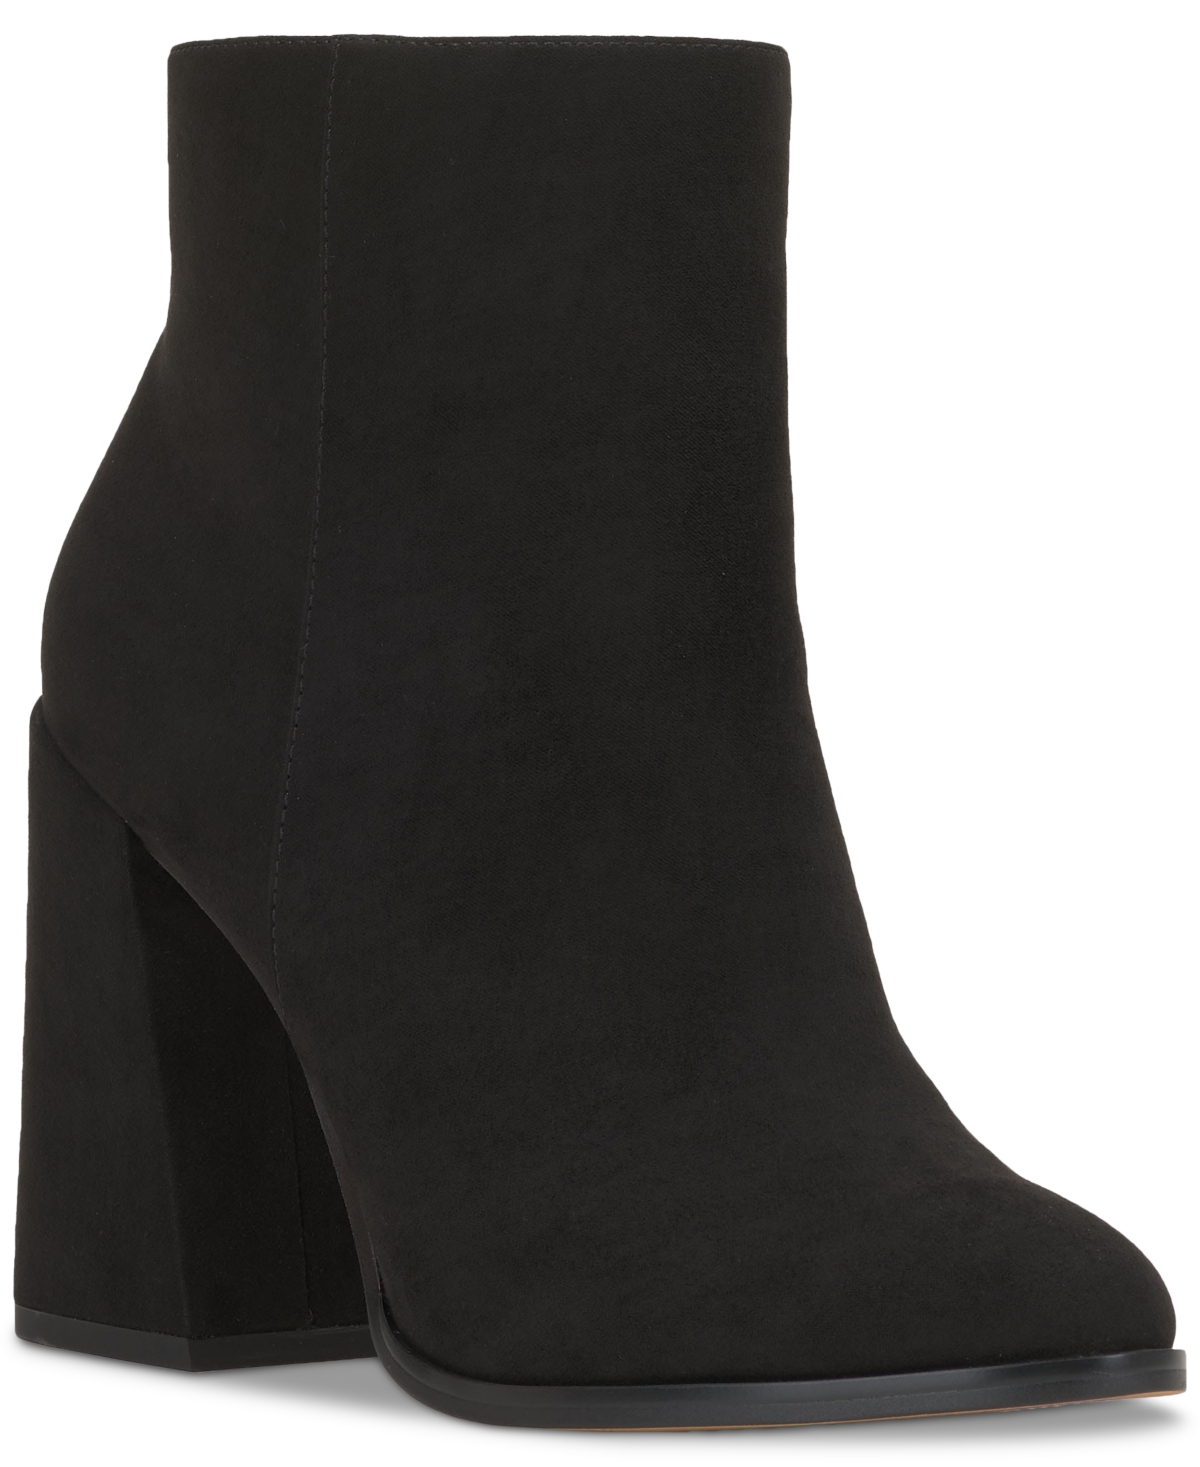 Jessica Simpson Women's Burdete Pointed-toe Dress Booties In Black Suede Faux Suede